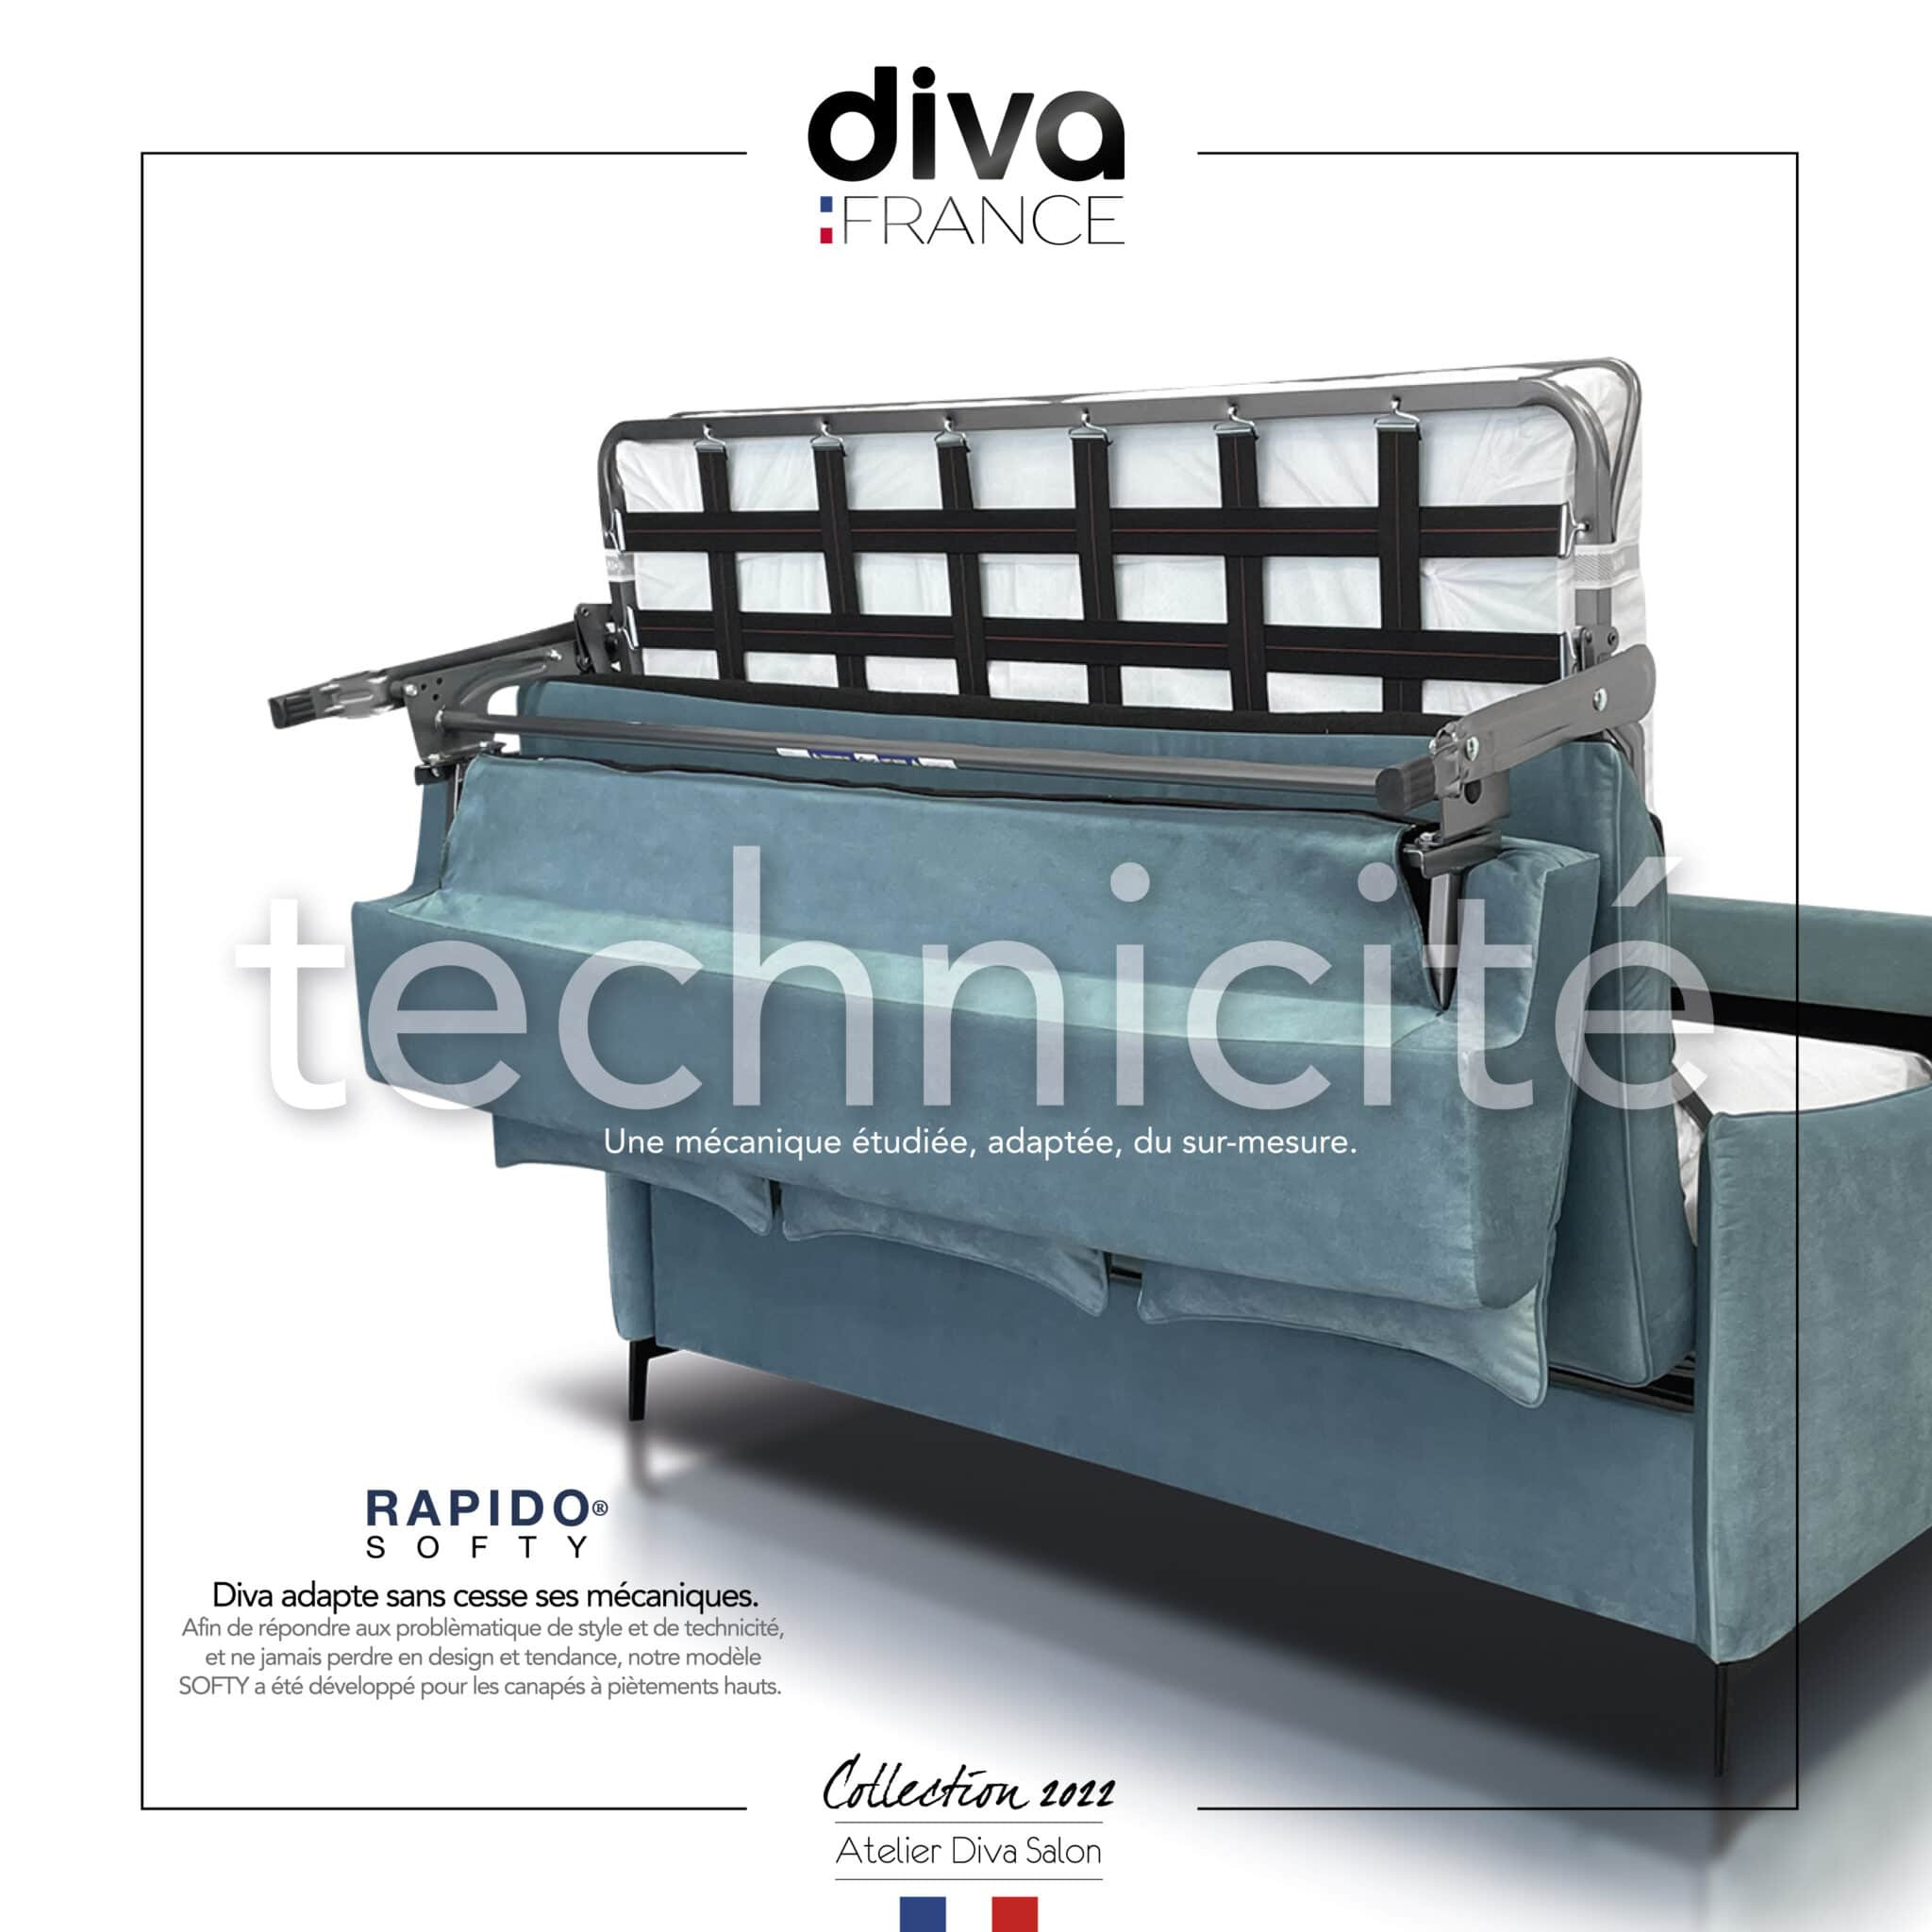 diva france canapes technologie rapido scaled